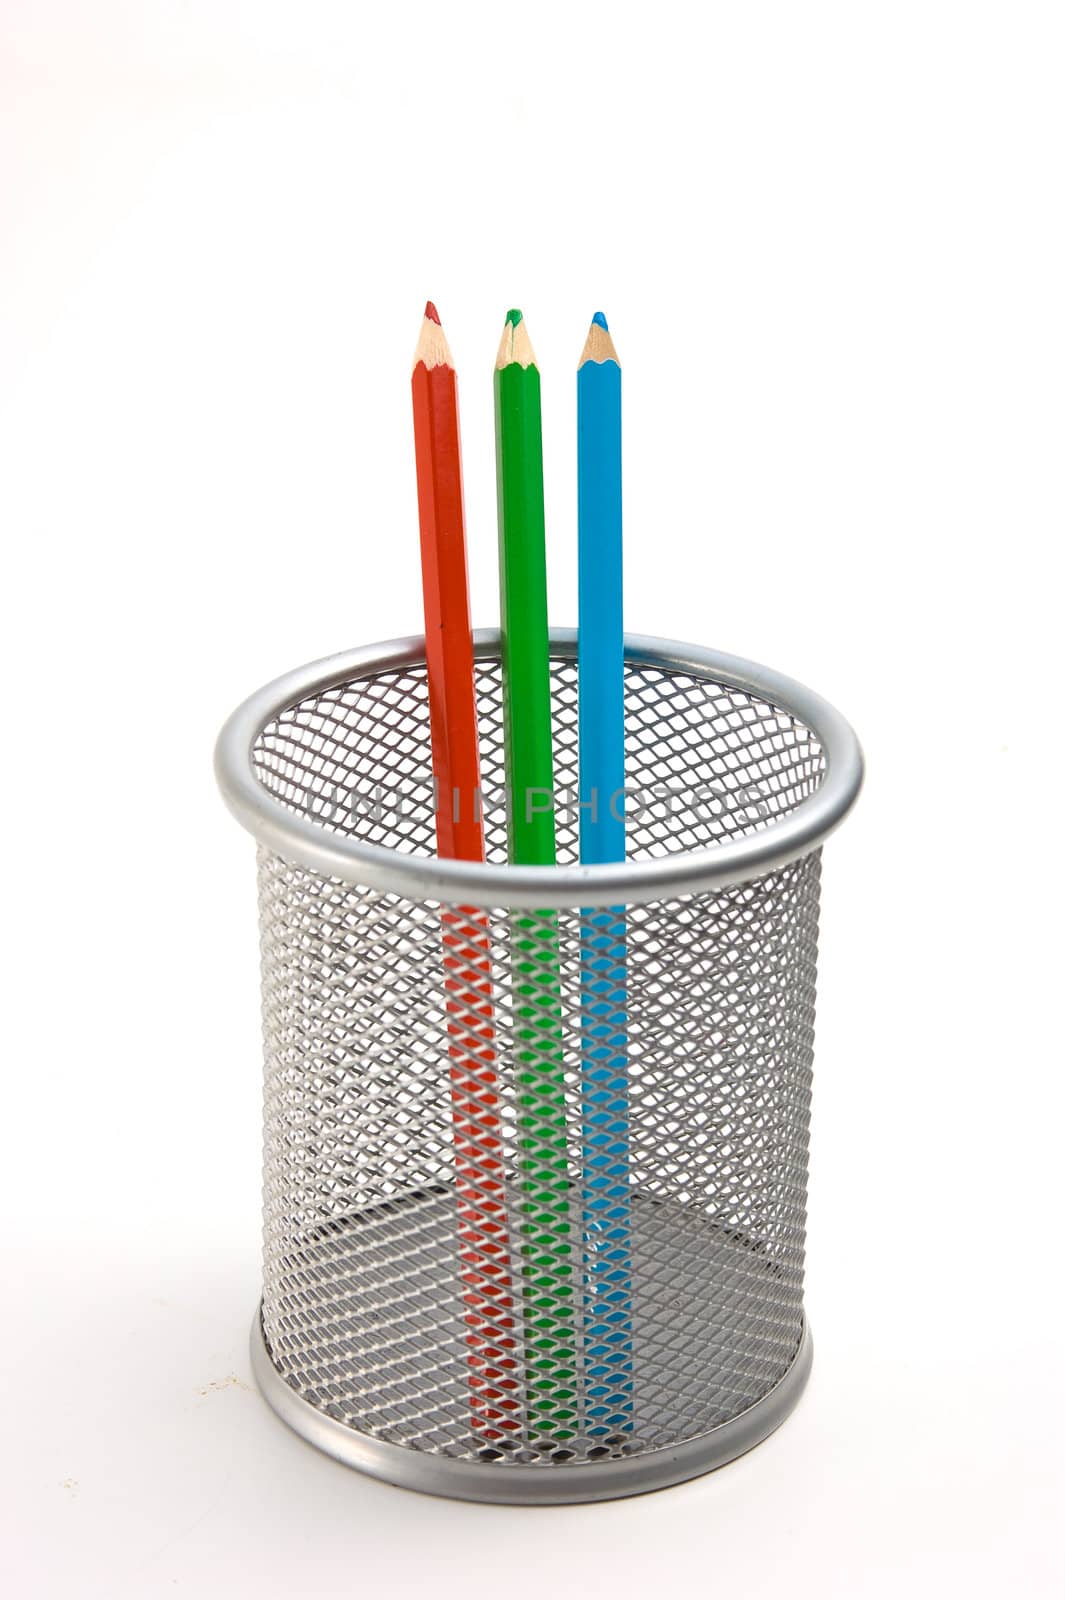 Pencils in basket isolated on a white background